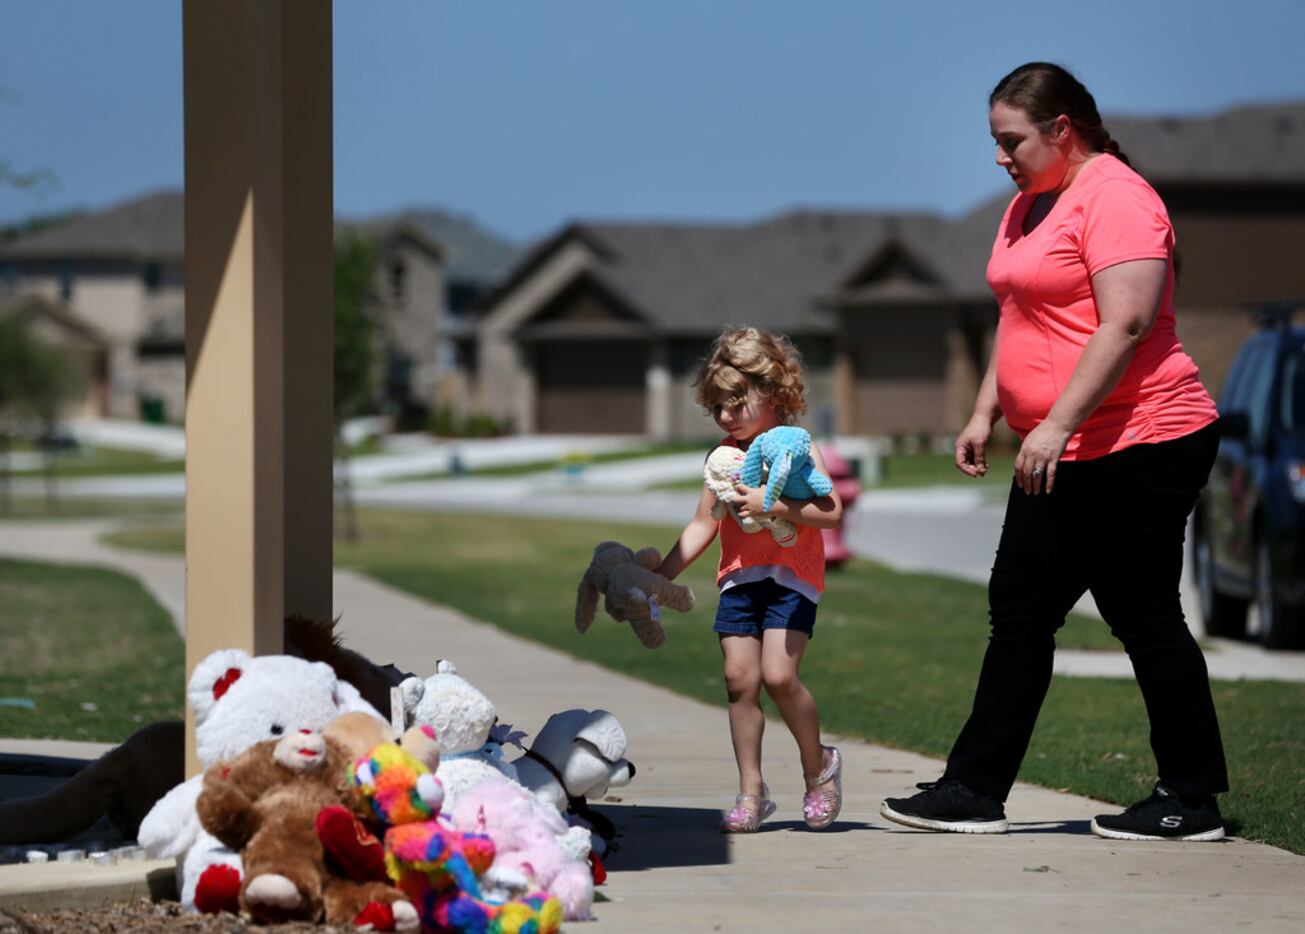 Judith McDuffie, 4, carries stuffed animals to place at a memorial with her mother Amanda...